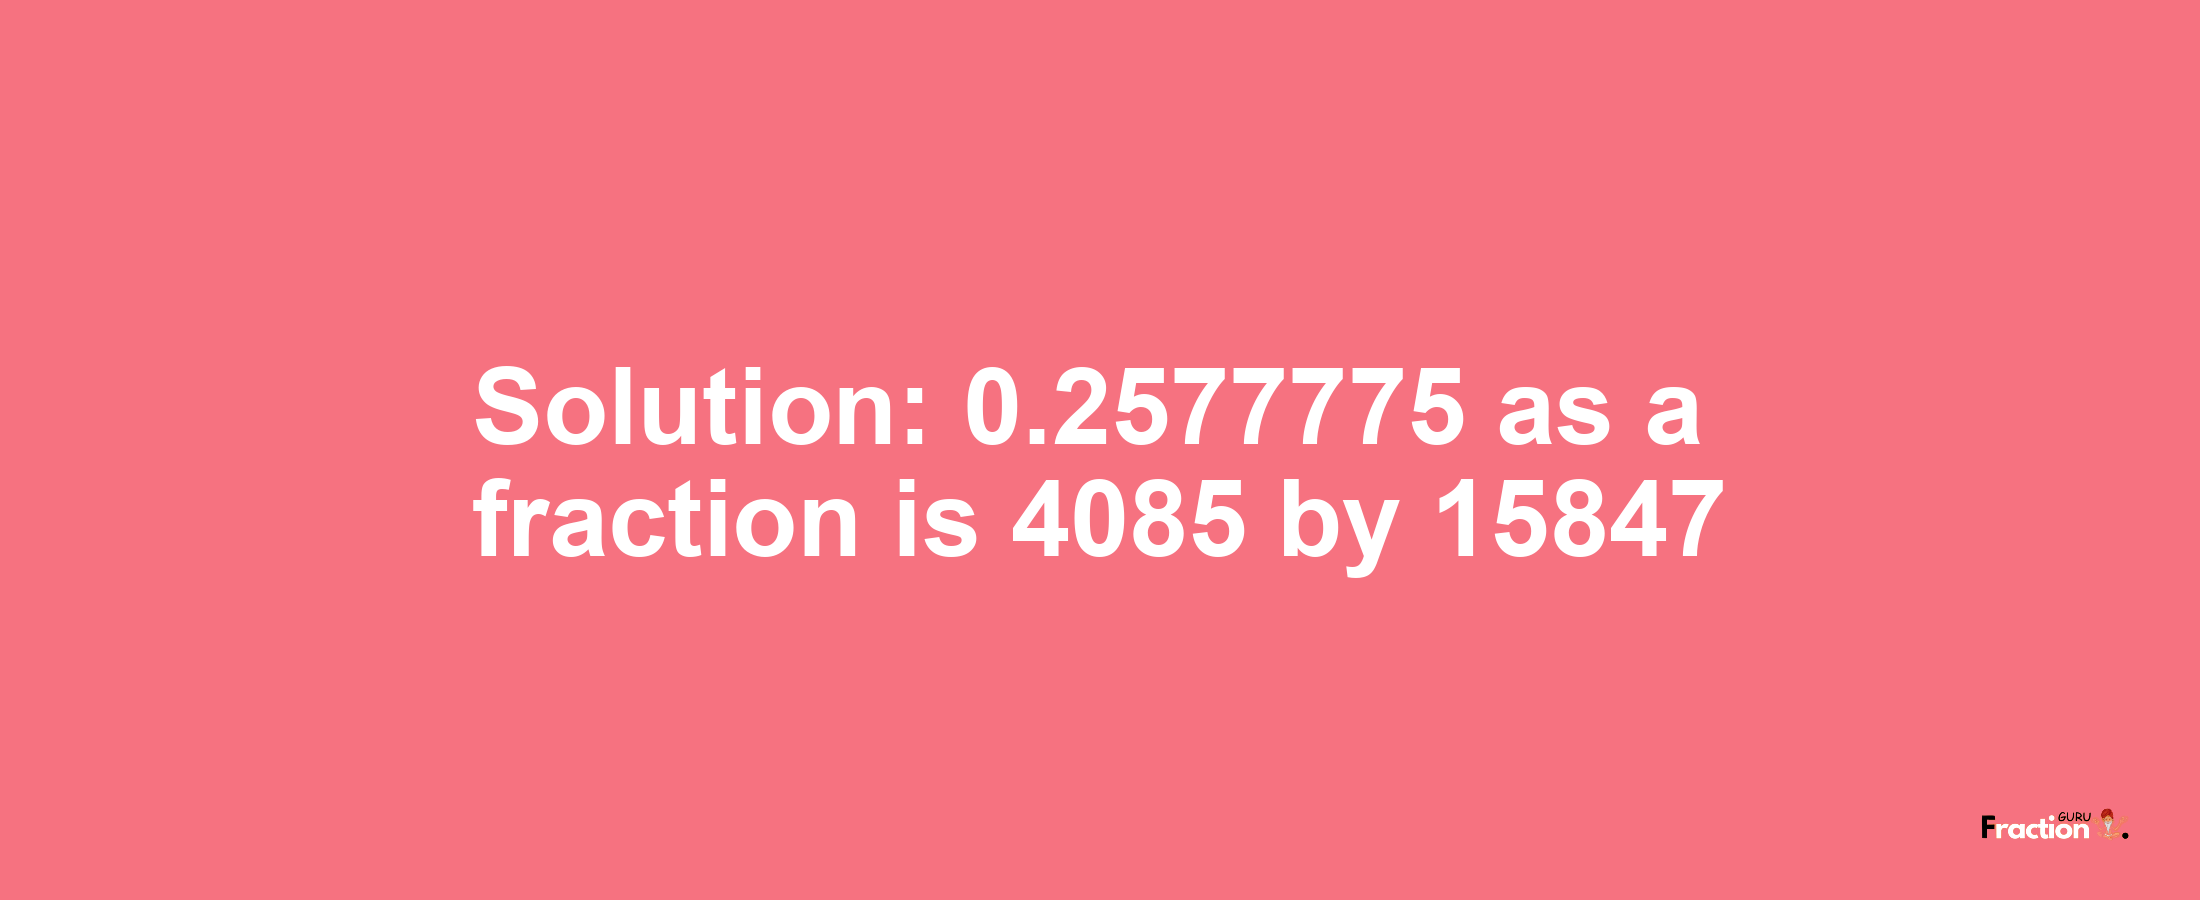 Solution:0.2577775 as a fraction is 4085/15847